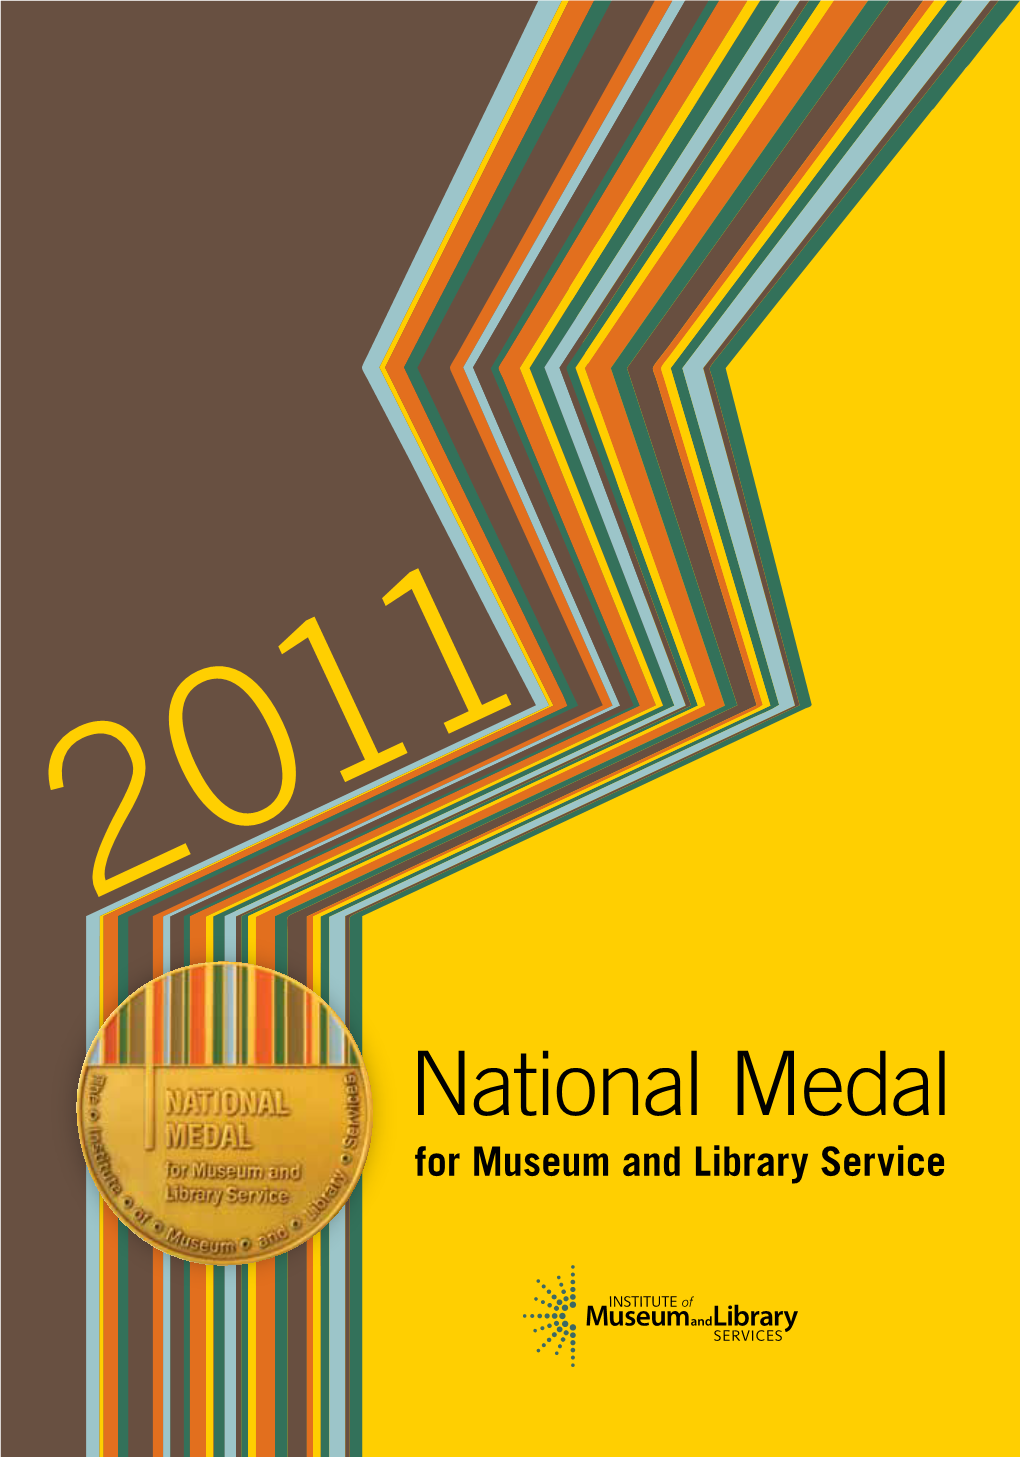 2011 National Medal for Museum and Library Service